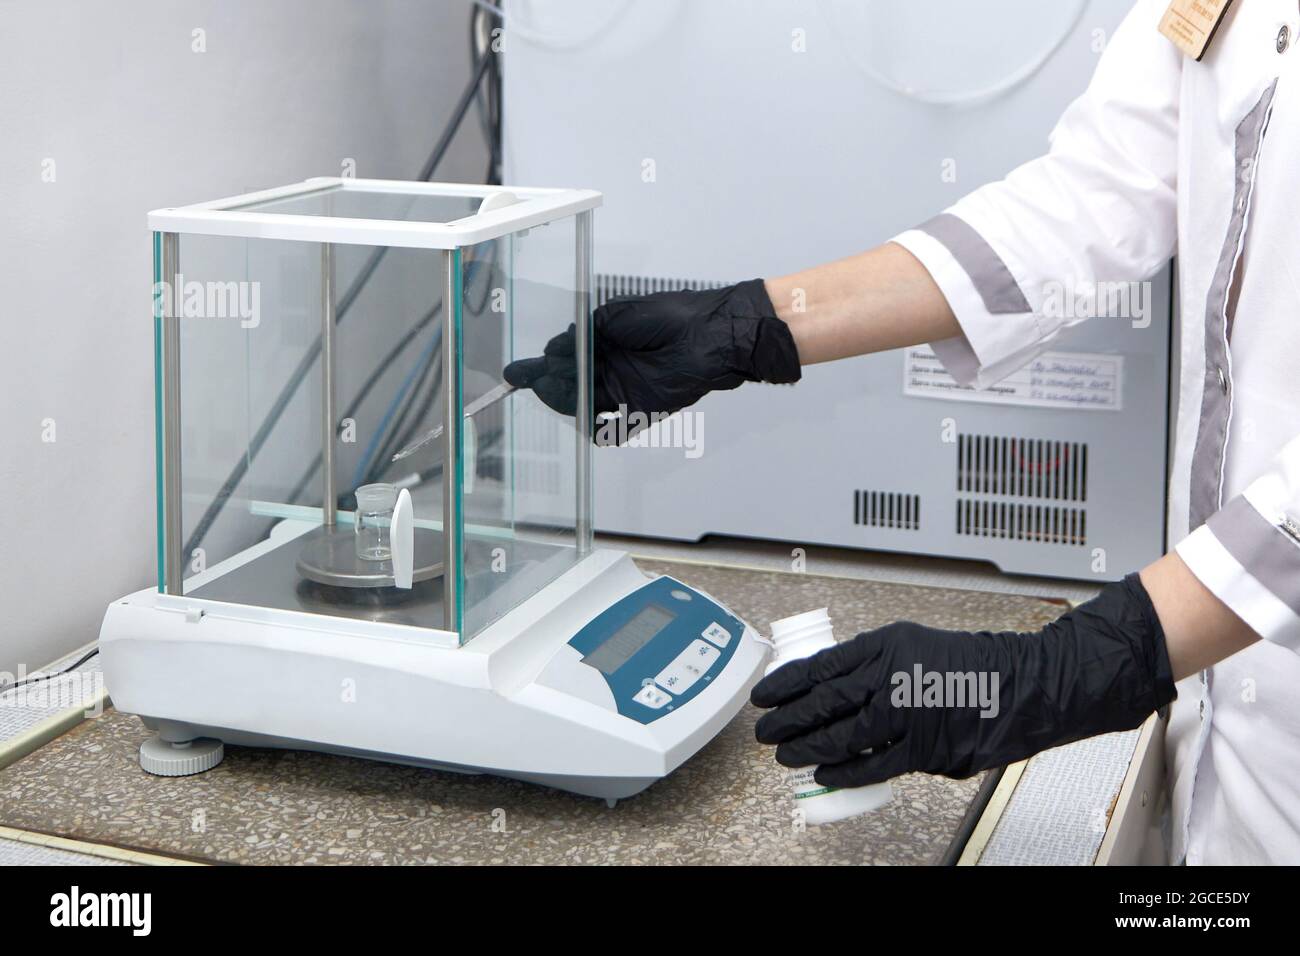 Scientist weighing chemicals by digital scales in grams in chemical laboratory Stock Photo